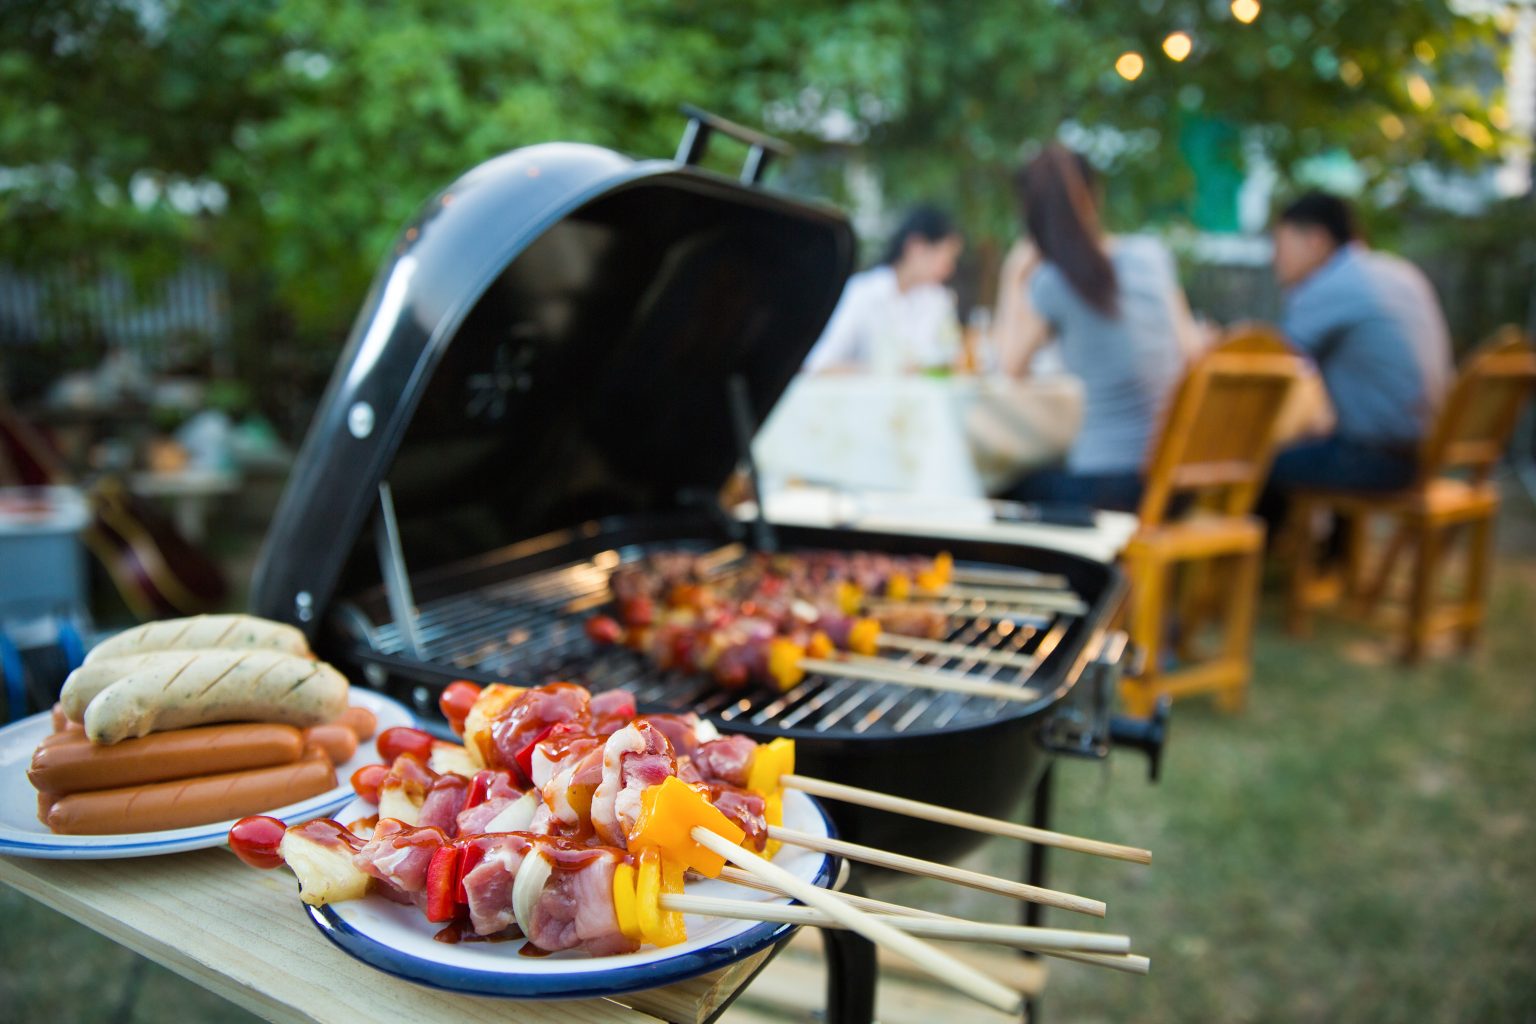 What BBQ cooking habit increases the risk of food poisoning?